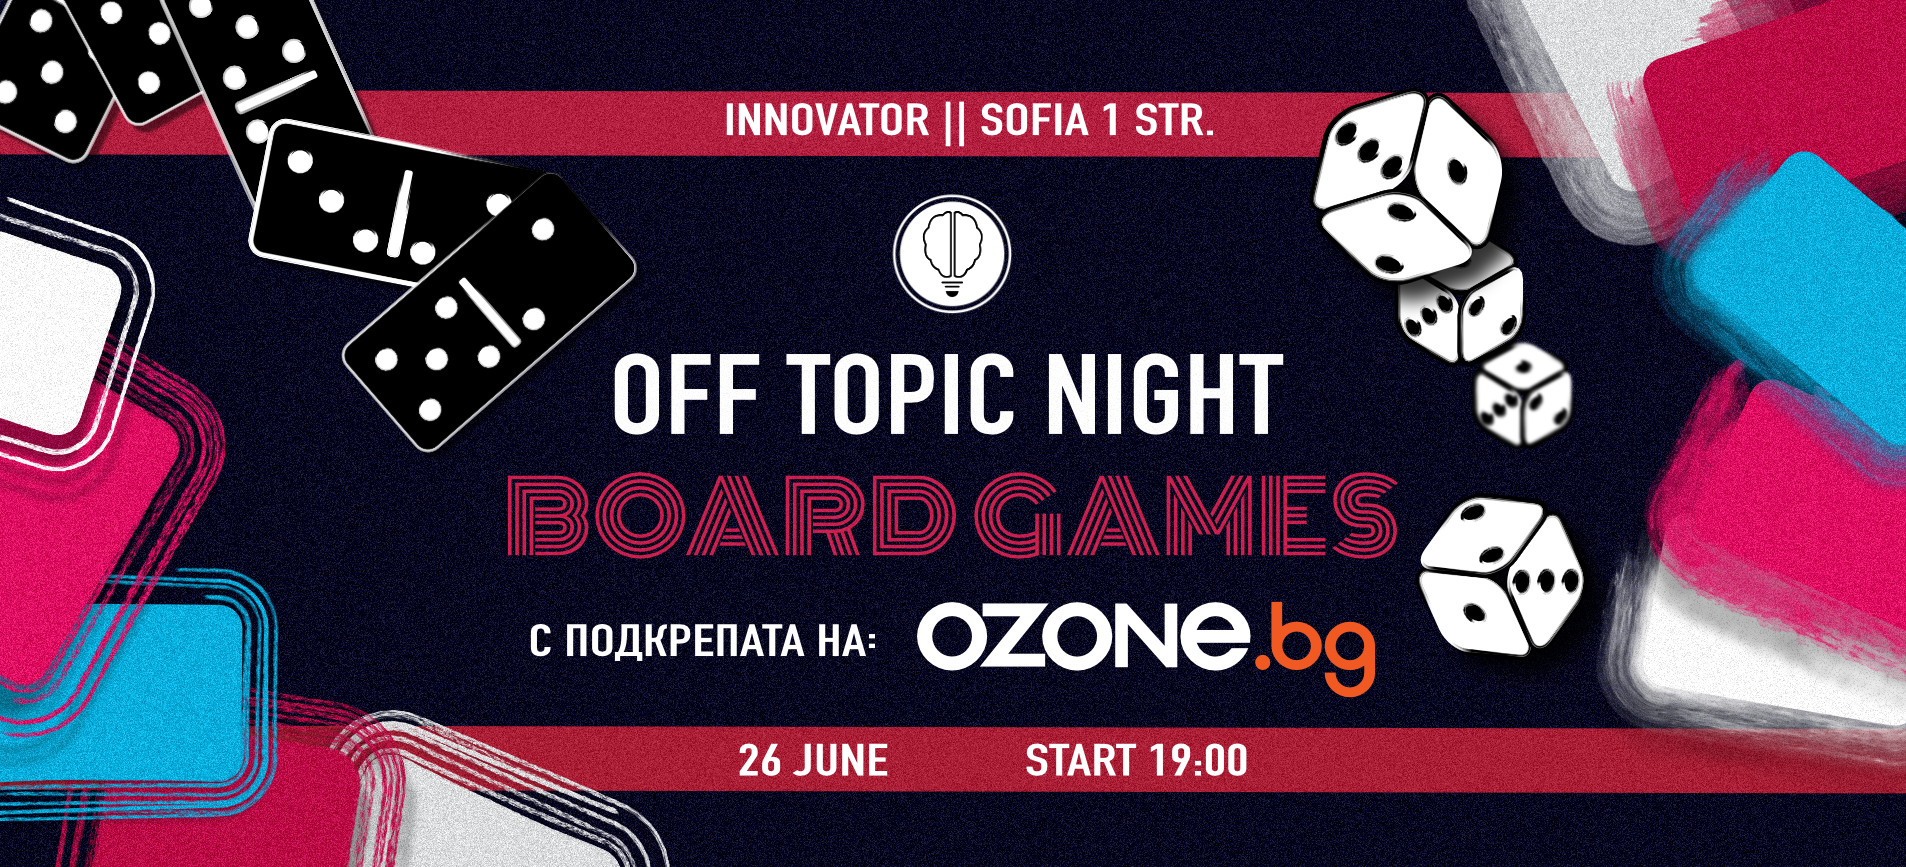 OFF Topic | Board Games Night 14 | Innovator Coworking Space